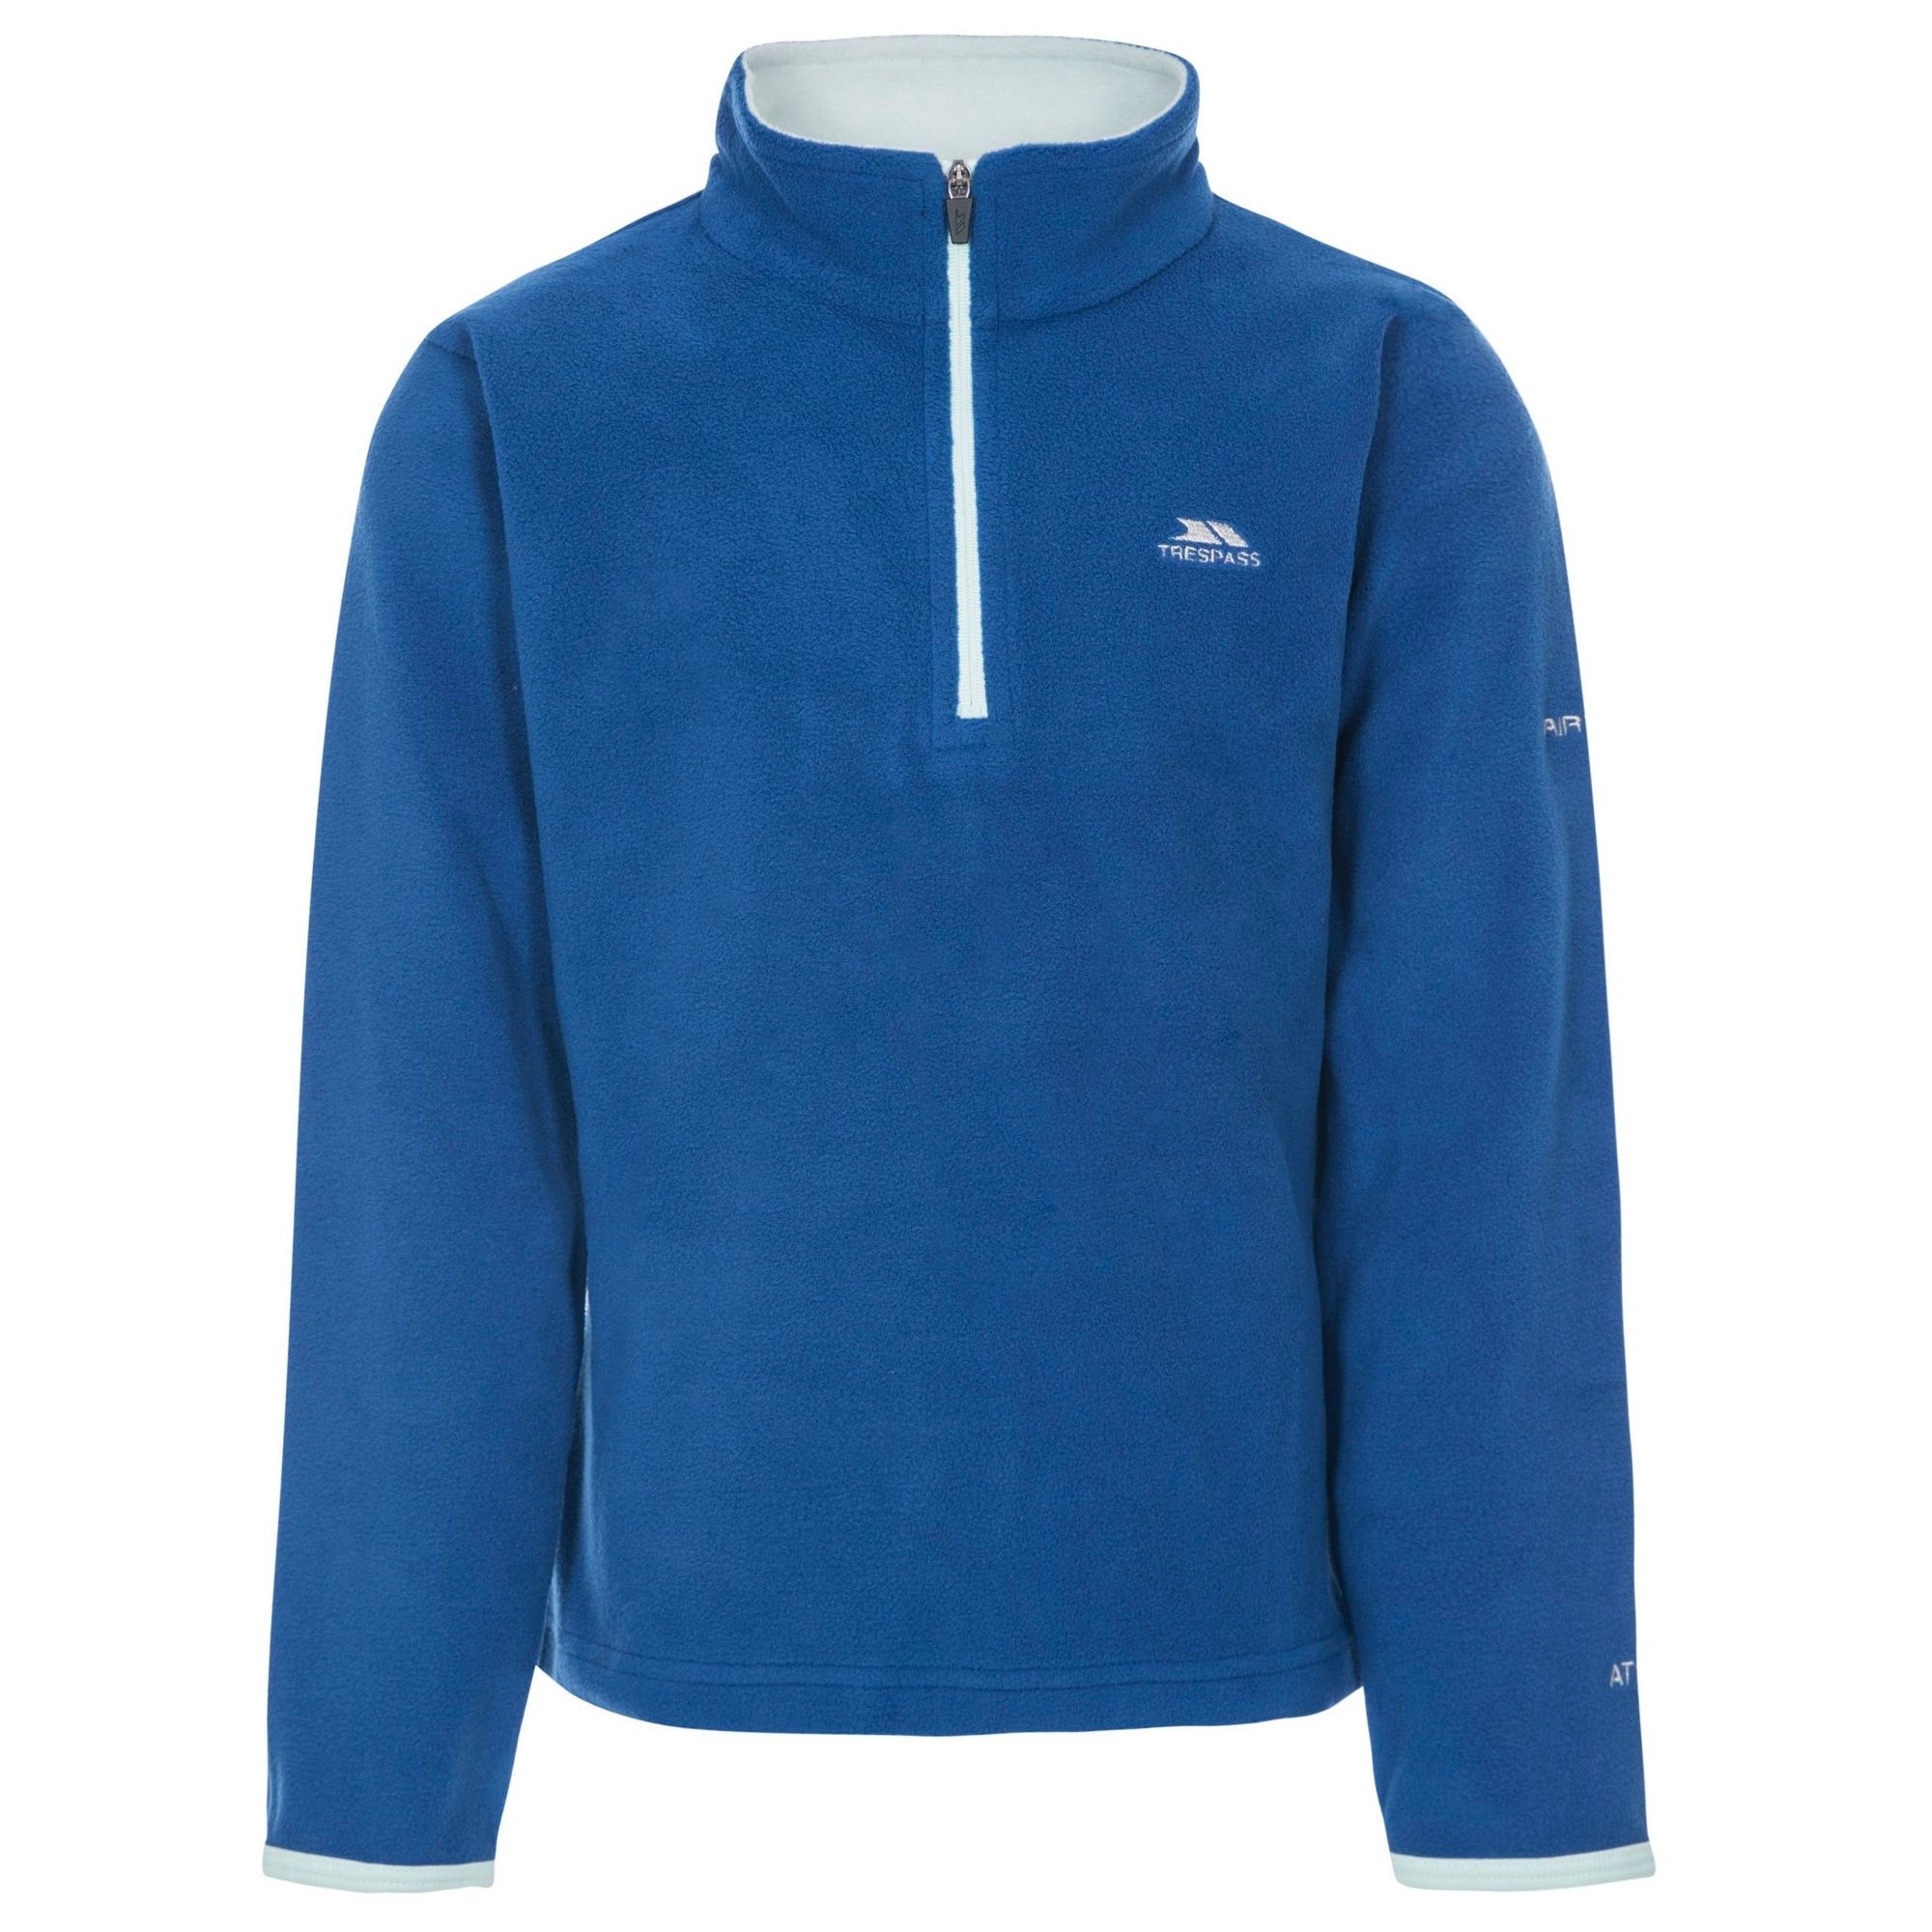 1/2 zip in contrast colour. Contrast binding on cuffs. Contrast facing on inner collar. Material: 100% polyester microfleece. Trespass Childrens Chest Sizing (approx): 2/3 Years - 21in/53cm, 3/4 Years - 22in/56cm, 5/6 Years - 24in/61cm, 7/8 Years - 26in/66cm, 9/10 Years - 28in/71cm, 11/12 Years - 31in/79cm.